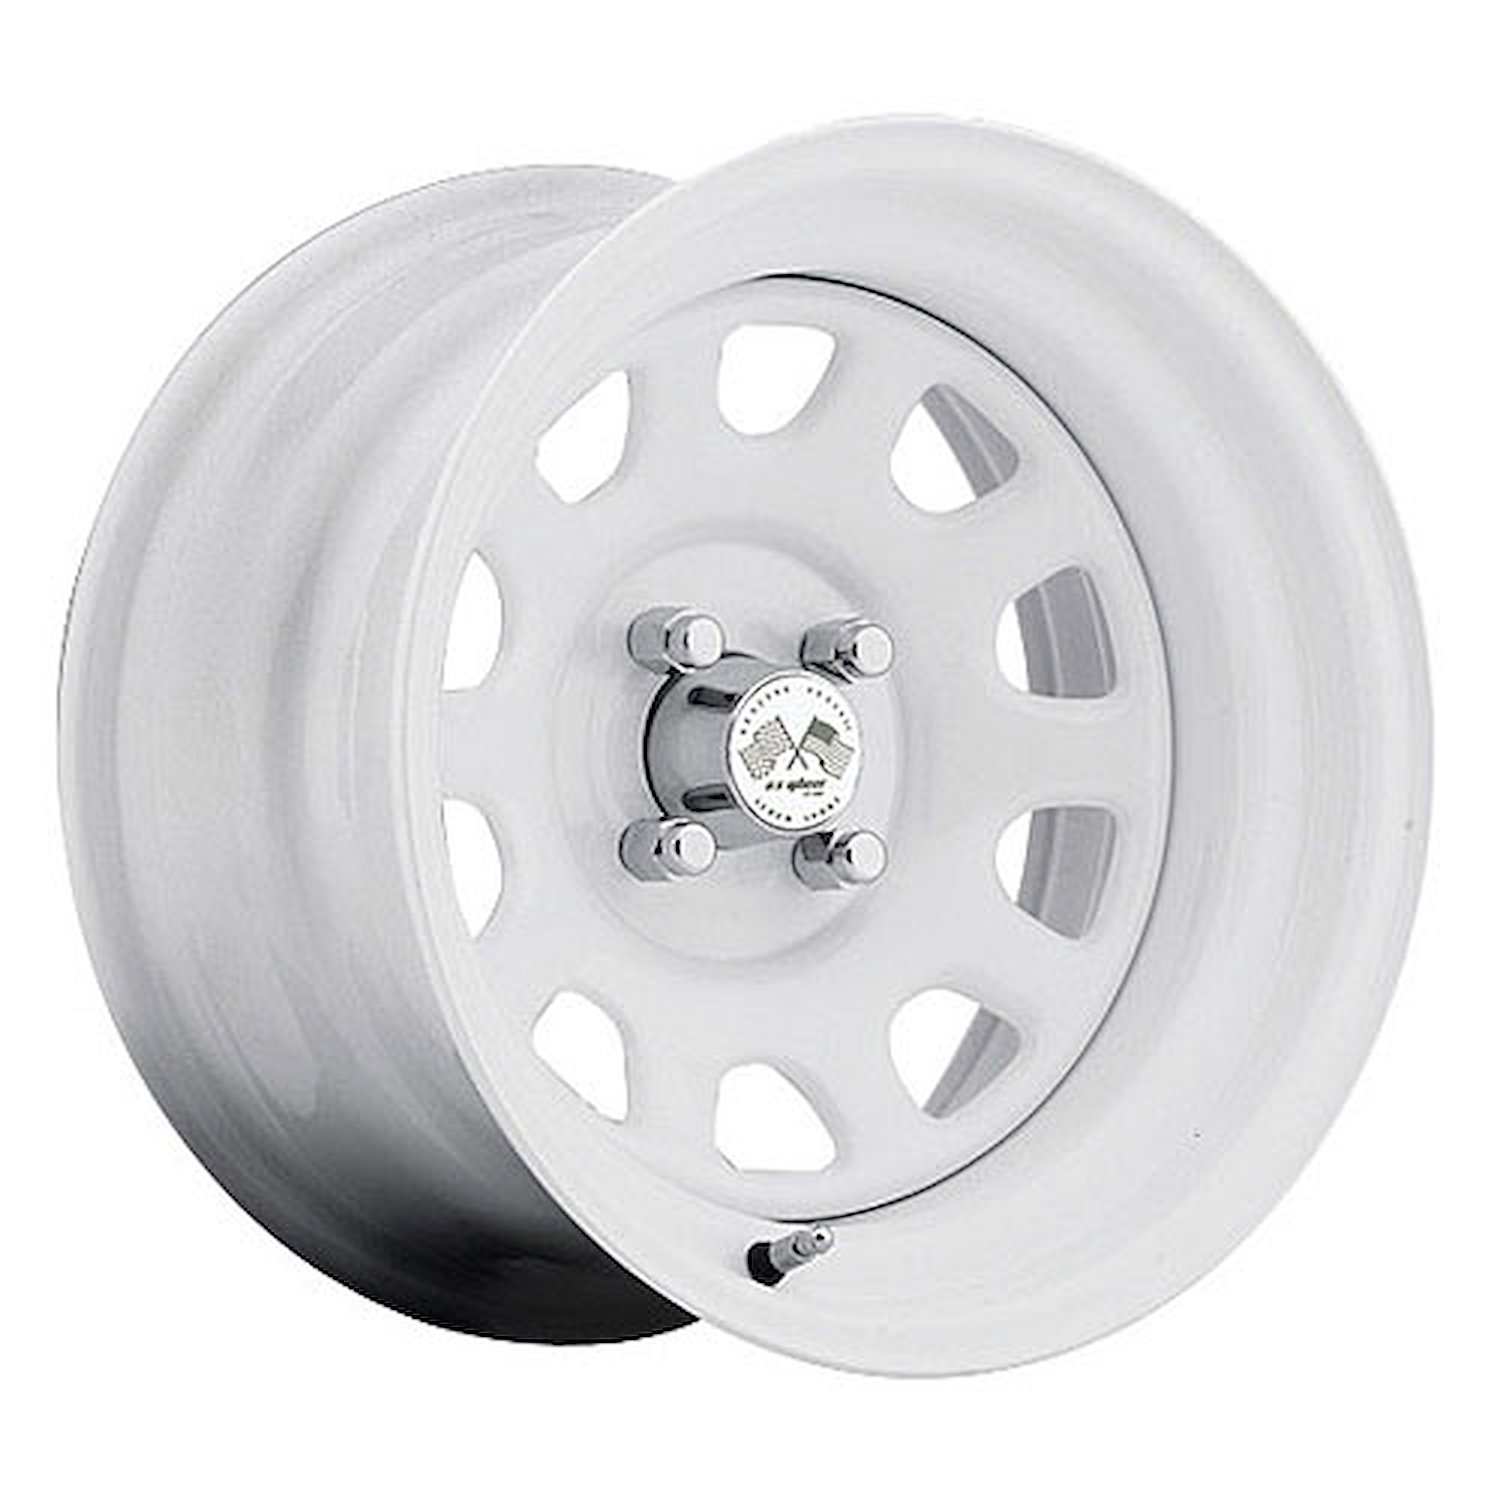 PAINTED DAYTONA FWD DRIFTER WHITE 15 x 7 5 x 45 Bolt Circle 4 Back Spacing 0 offset 266 Center Bore 1400 lbs Load Rating